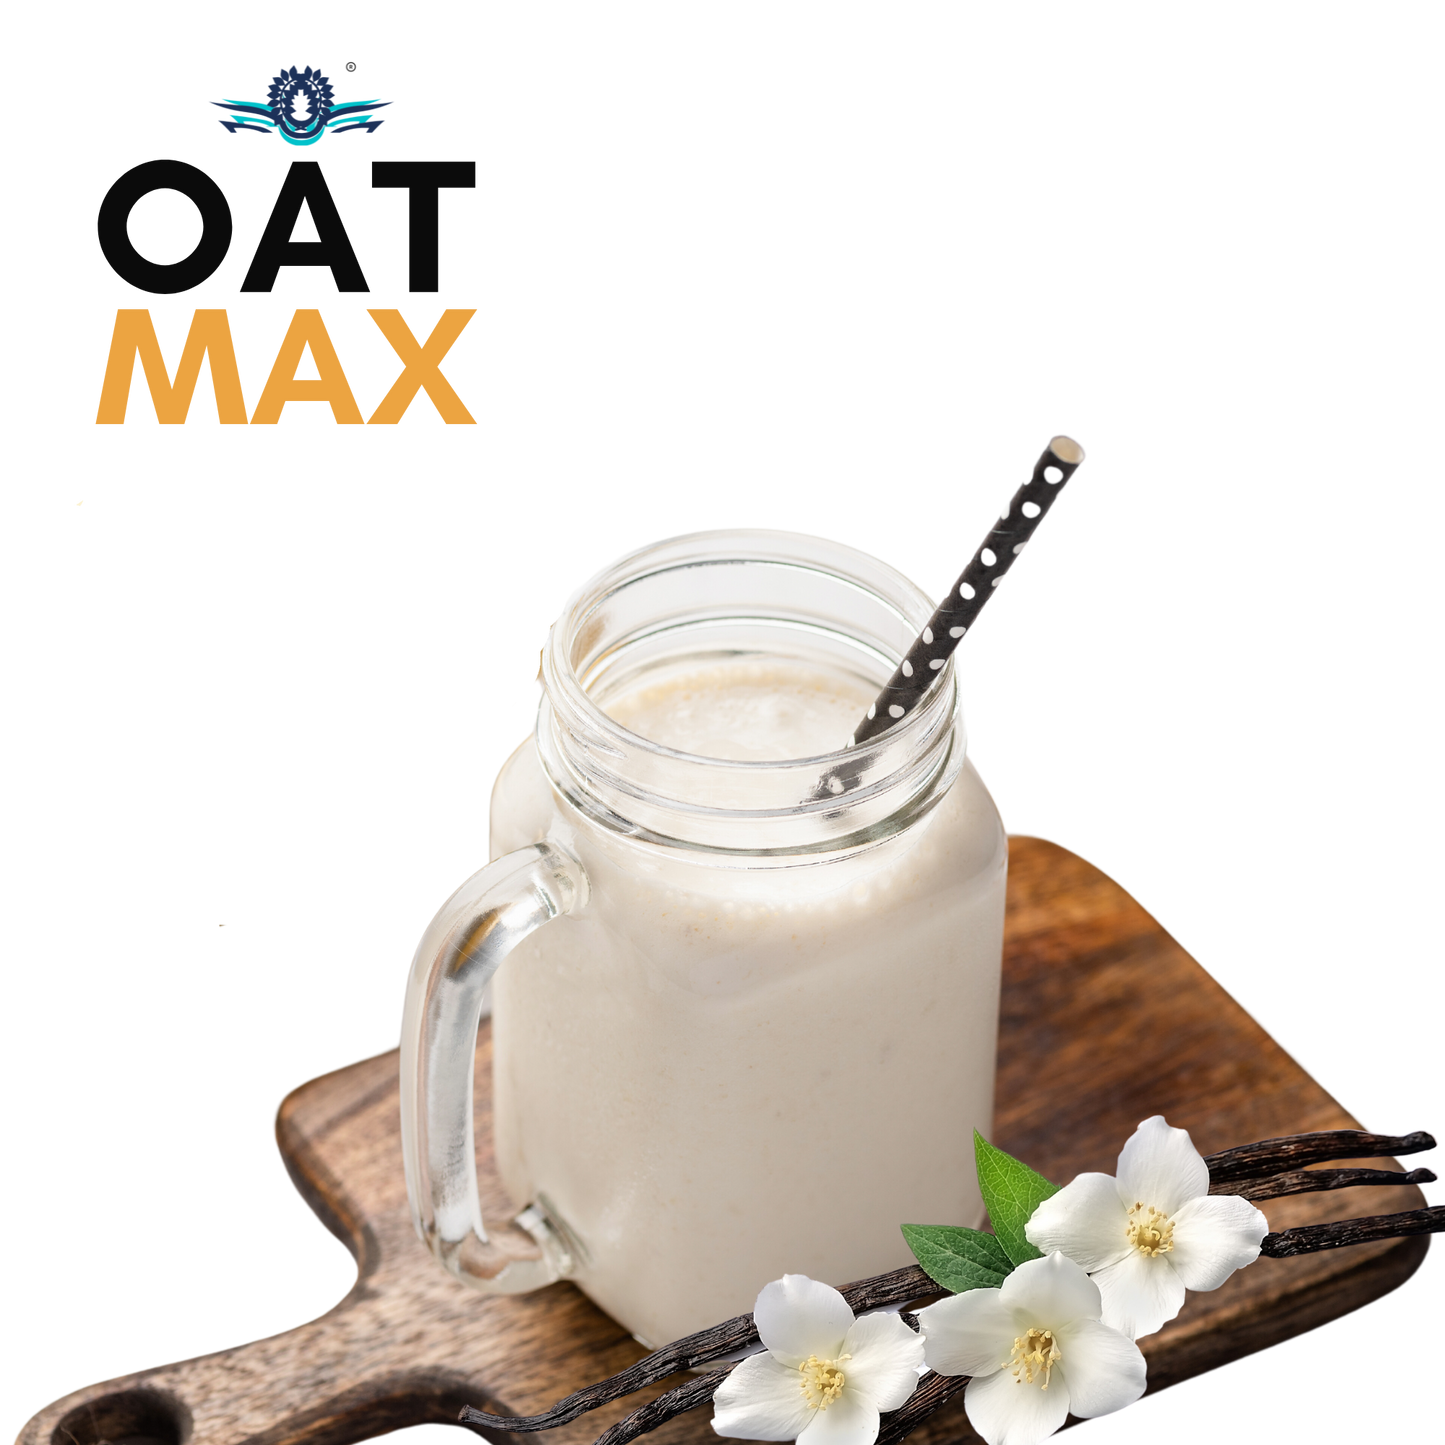 OATMAX VANILLA SMOOTHIE PREMIX – VANILLA DRINK POWDER | NATURAL POWDERS AND OATS | INSTANT MILK OR WATER MIX | NO ADDED PRESERVATIVES OR FLAVOURS